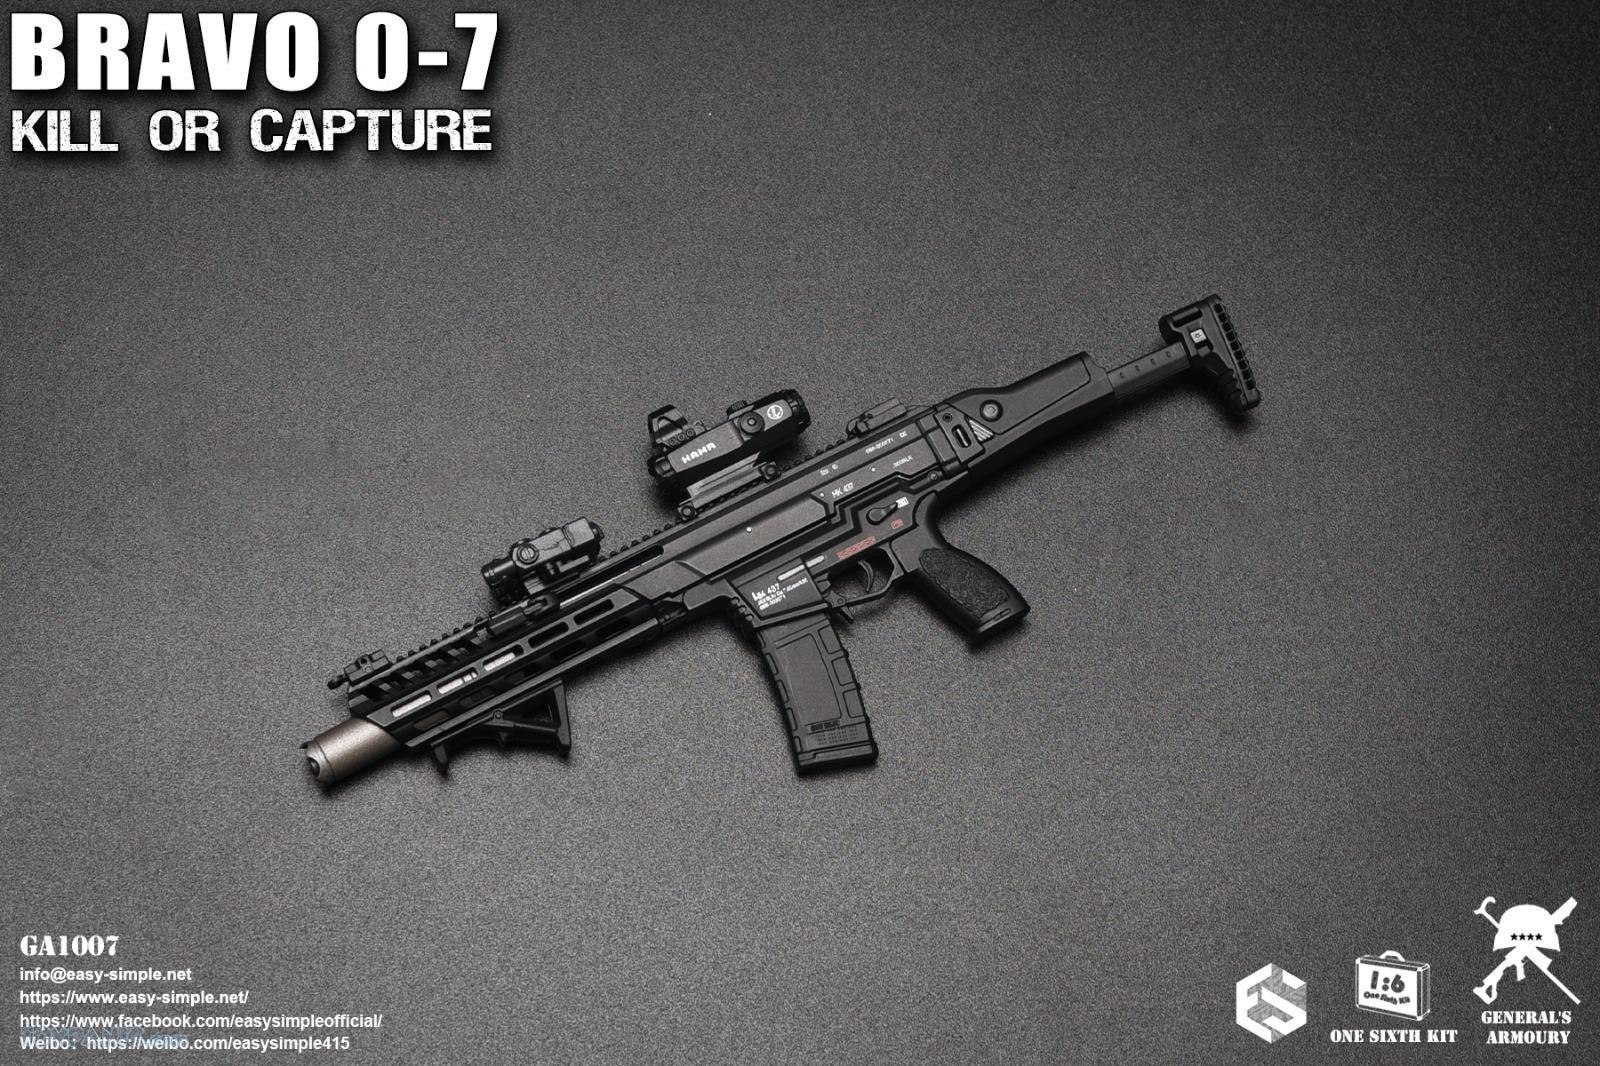 General&#39;s Armory - GA1007 - Bravo 0-7 Kill or Capture (1/6 Scale) - Marvelous Toys